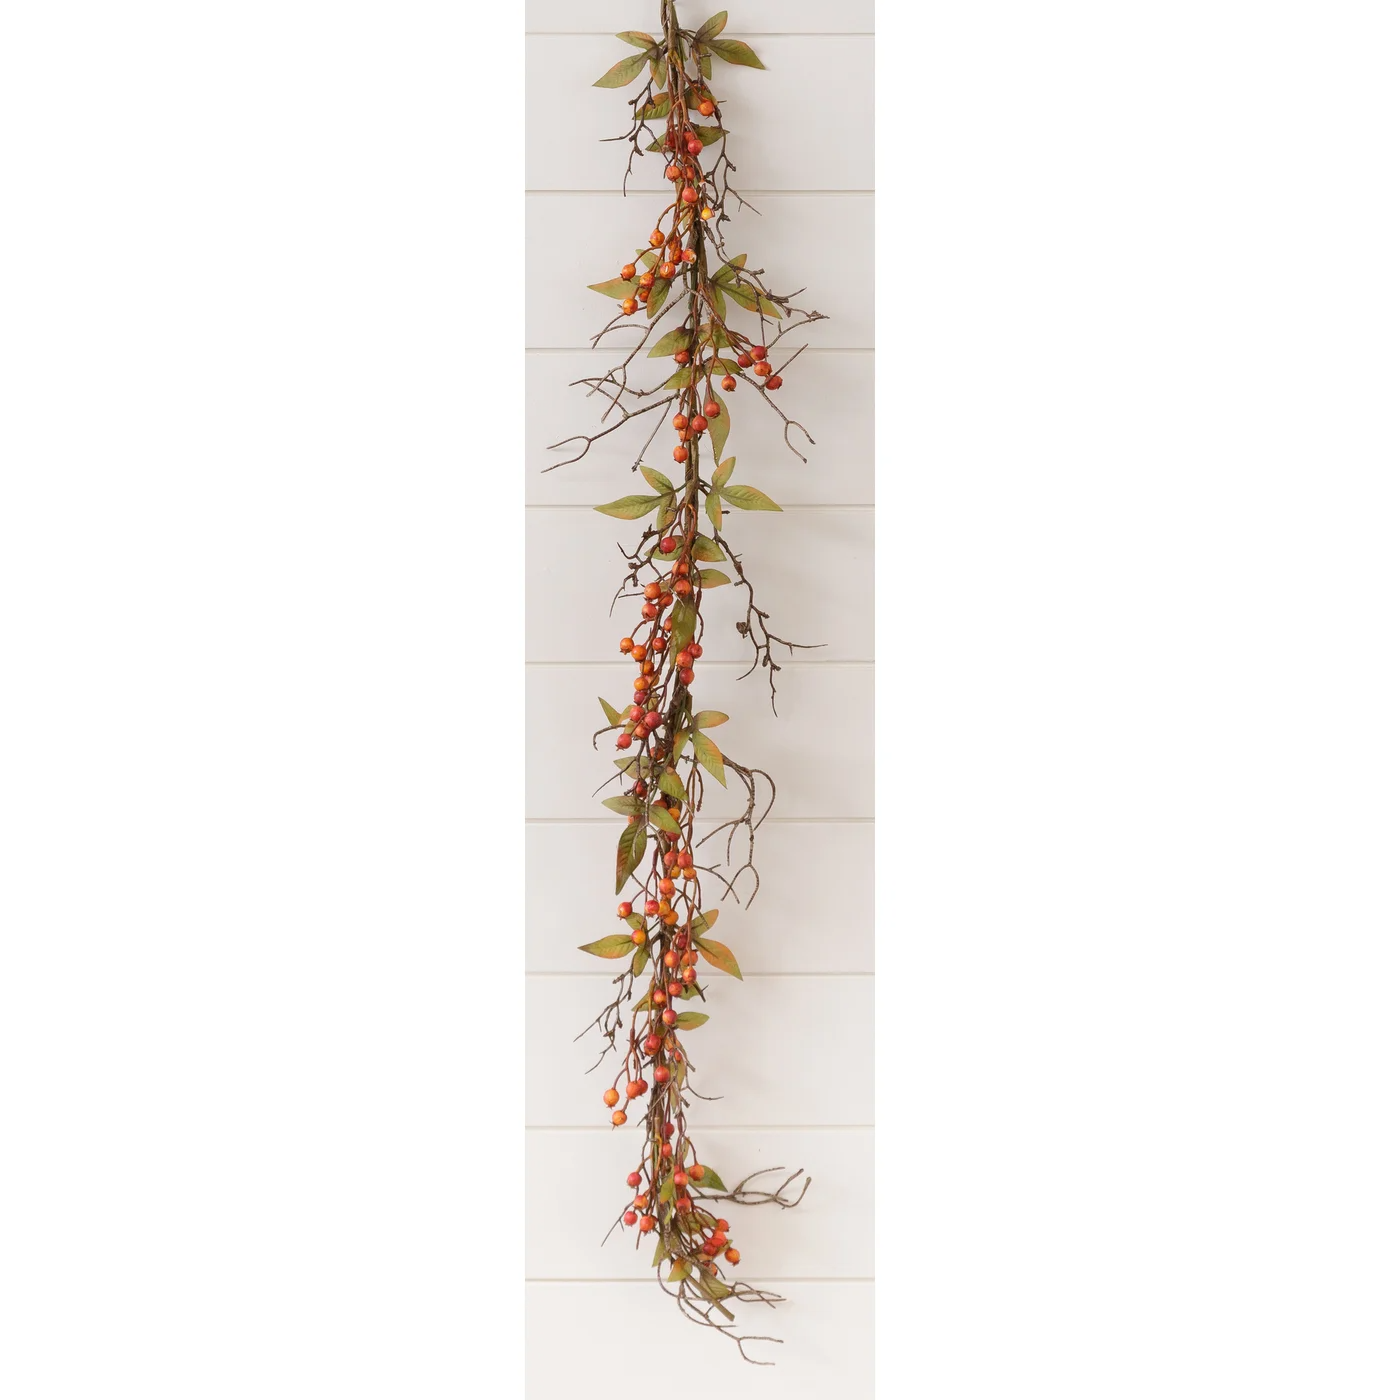 Persimmon Berries Leaves and Twigs 48" Faux Botanical Garland